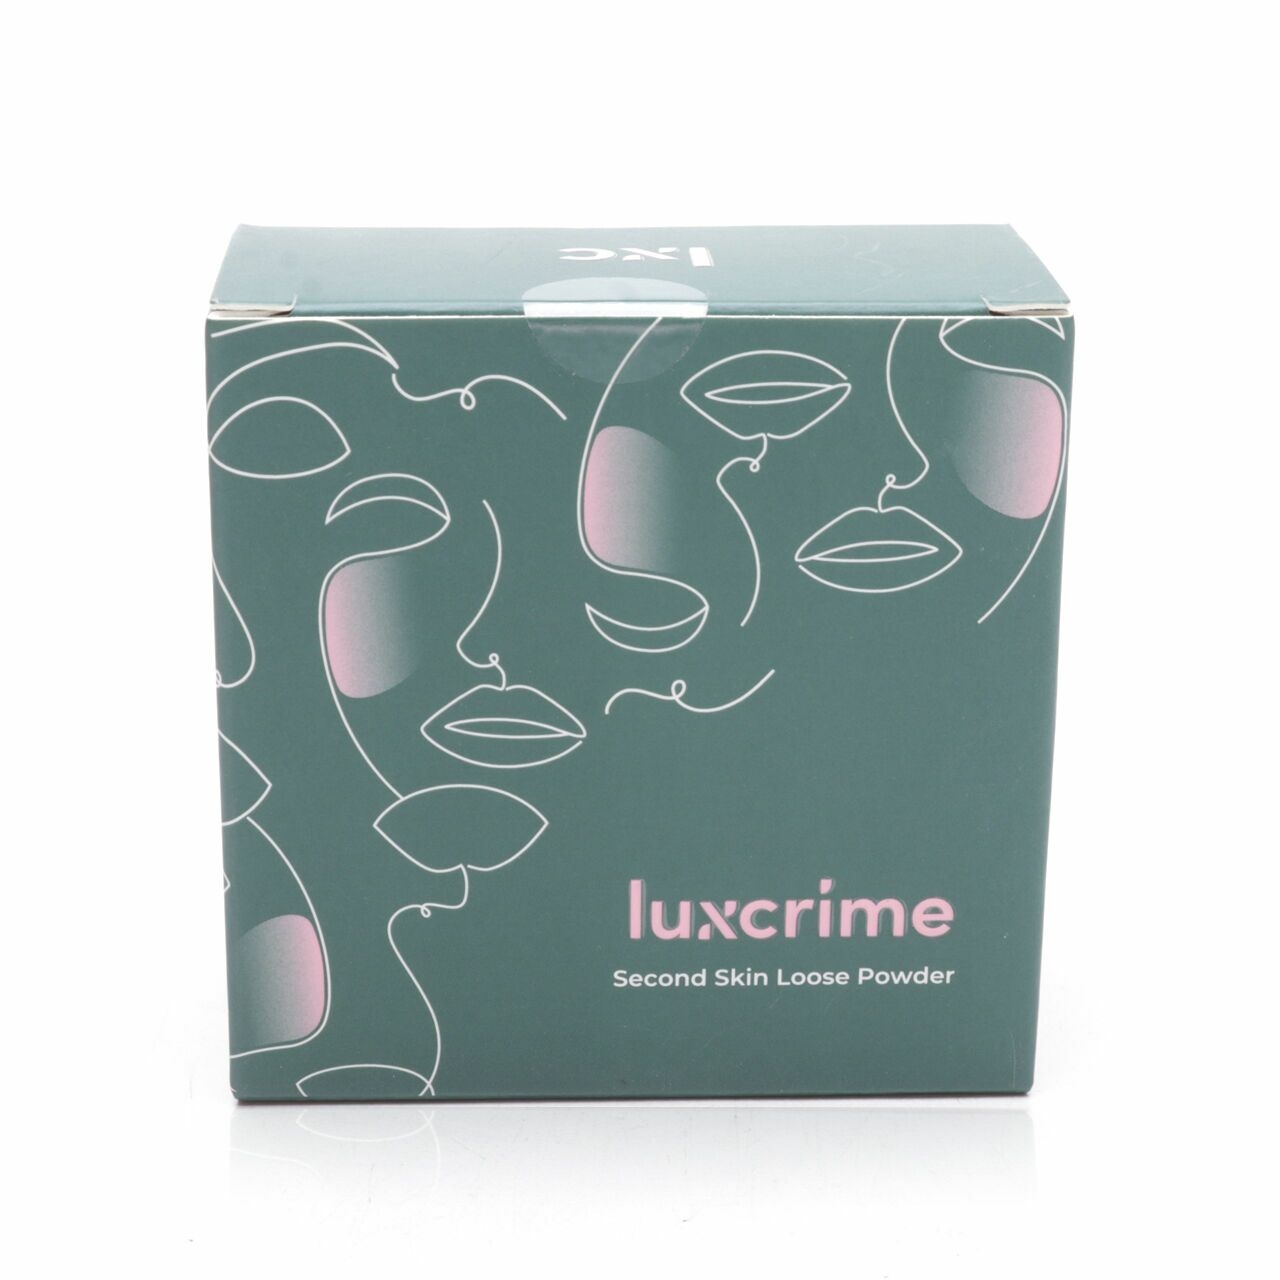 Luxcrime Second Skin Loose Powder - Banana Faces